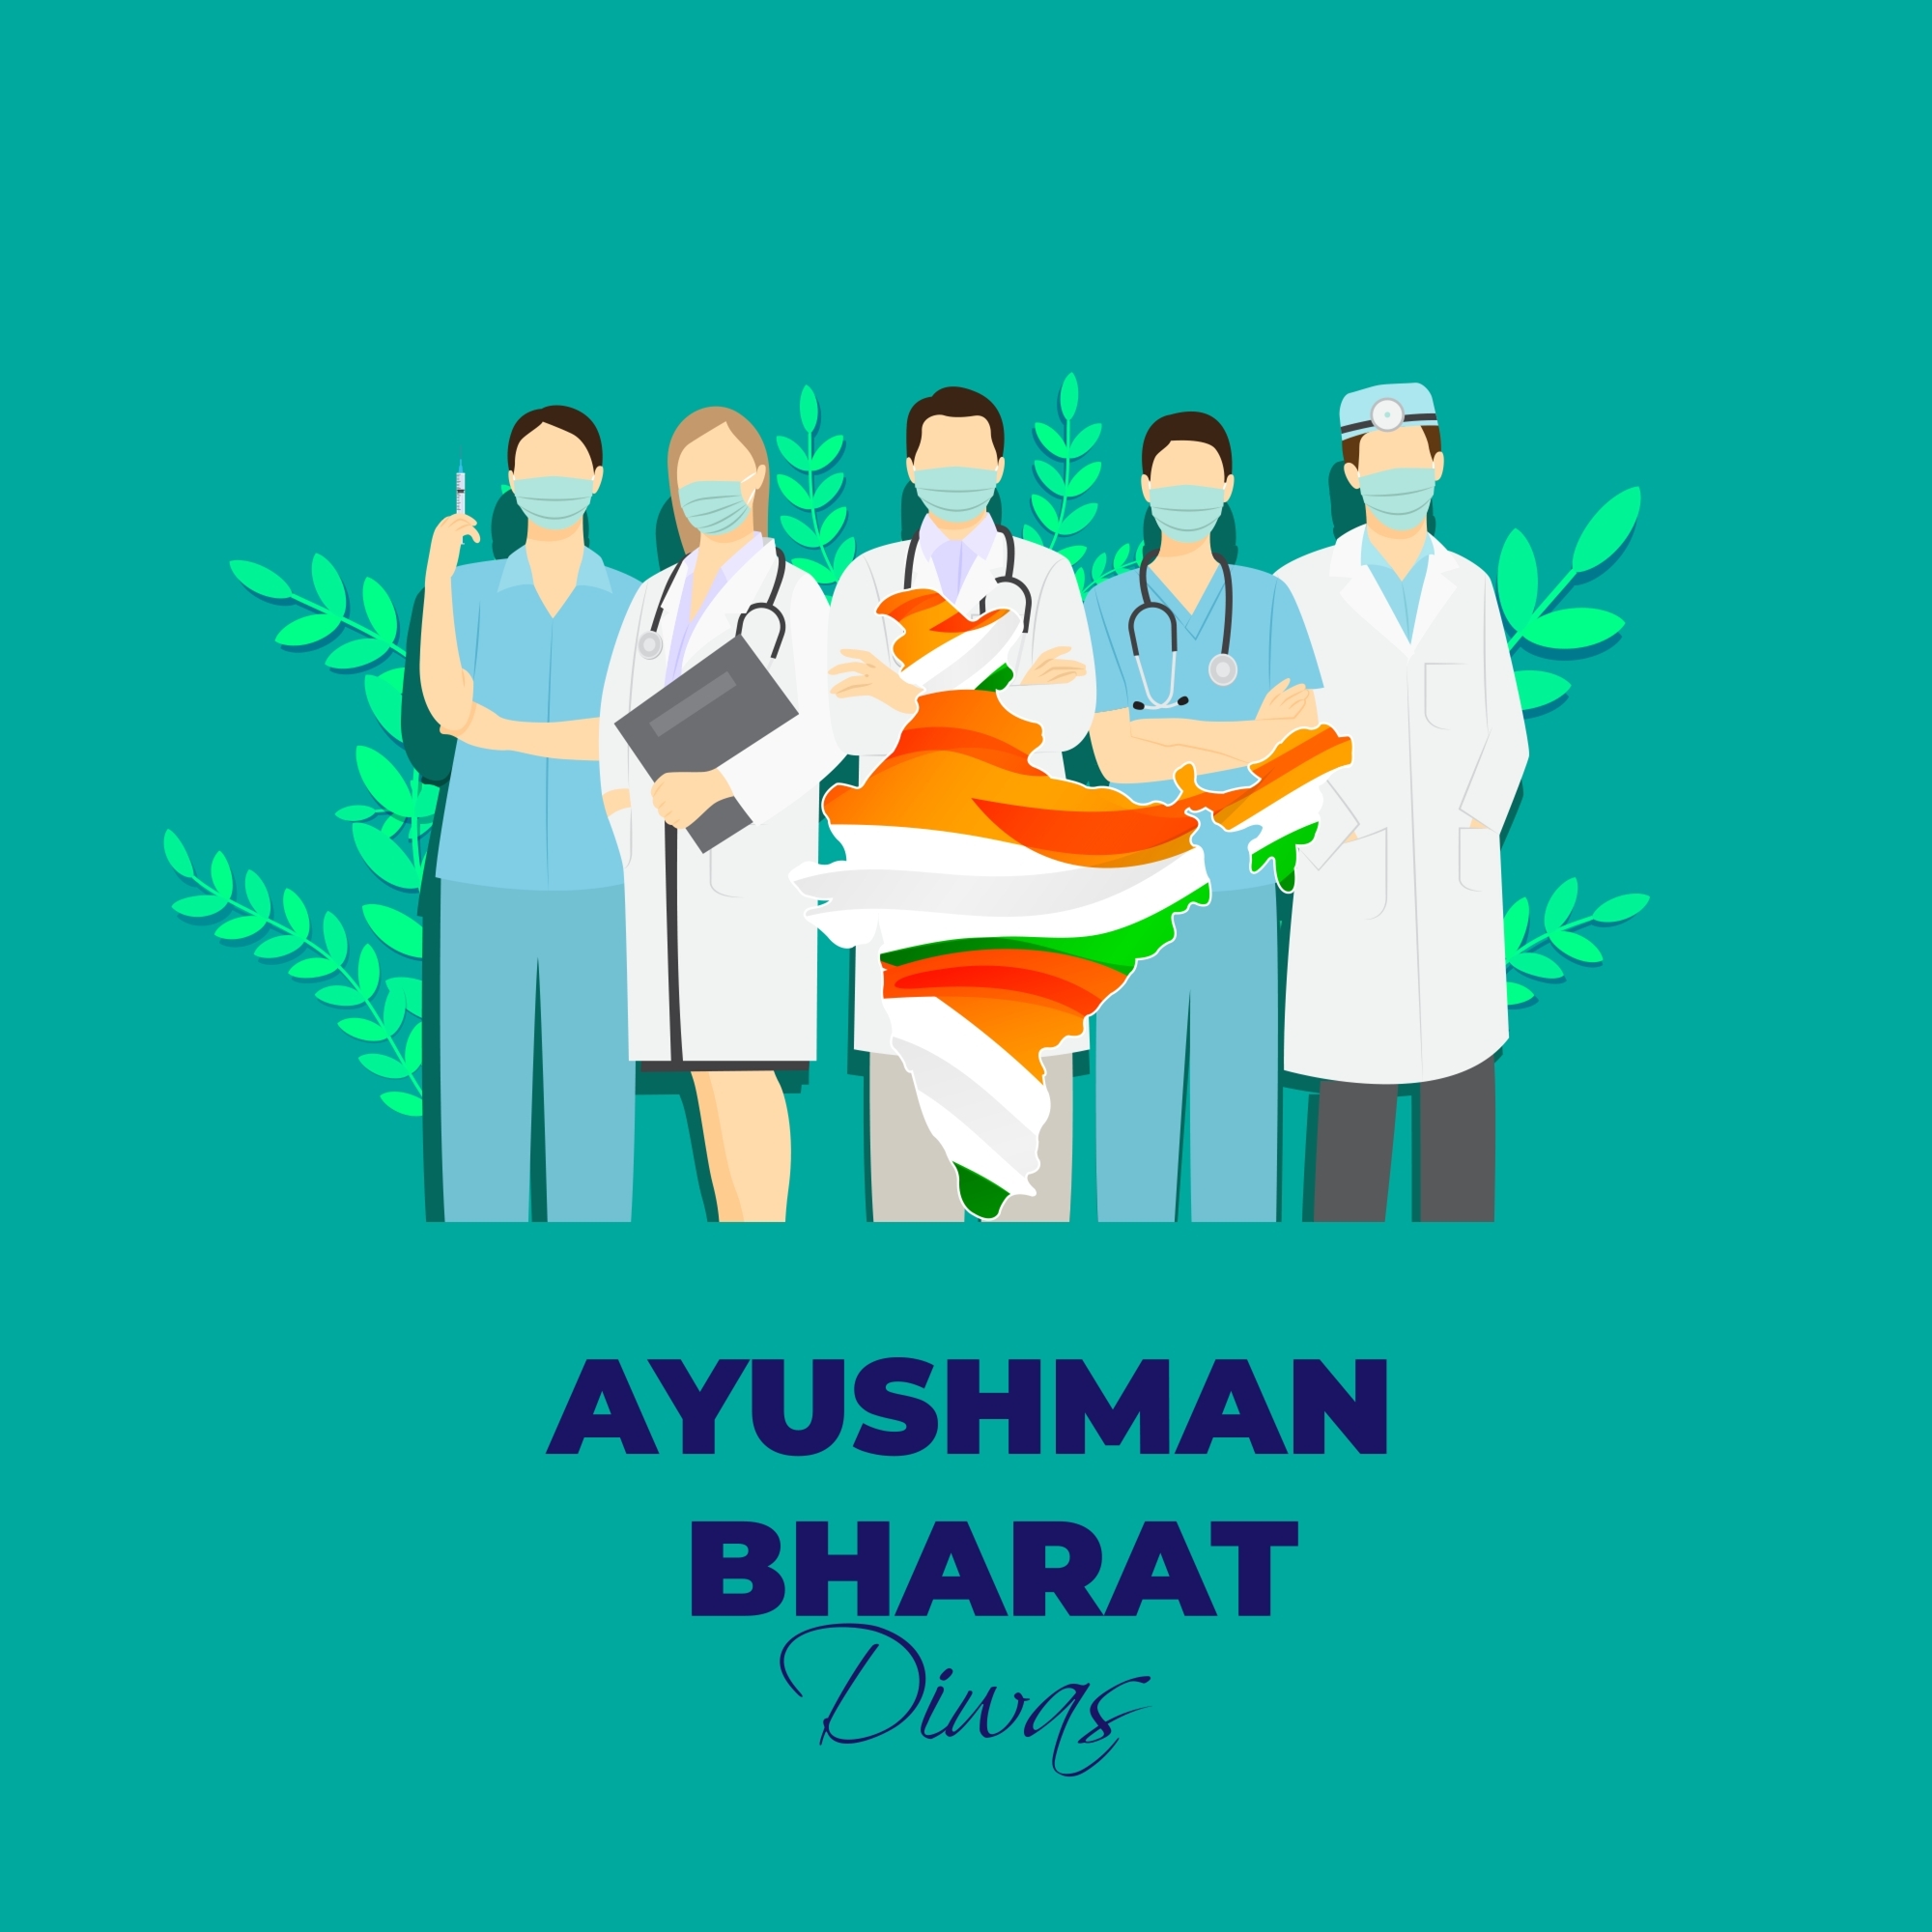 Thera are many doctors who have face the mask and help others on corona time through Ayushman Bharat yojana